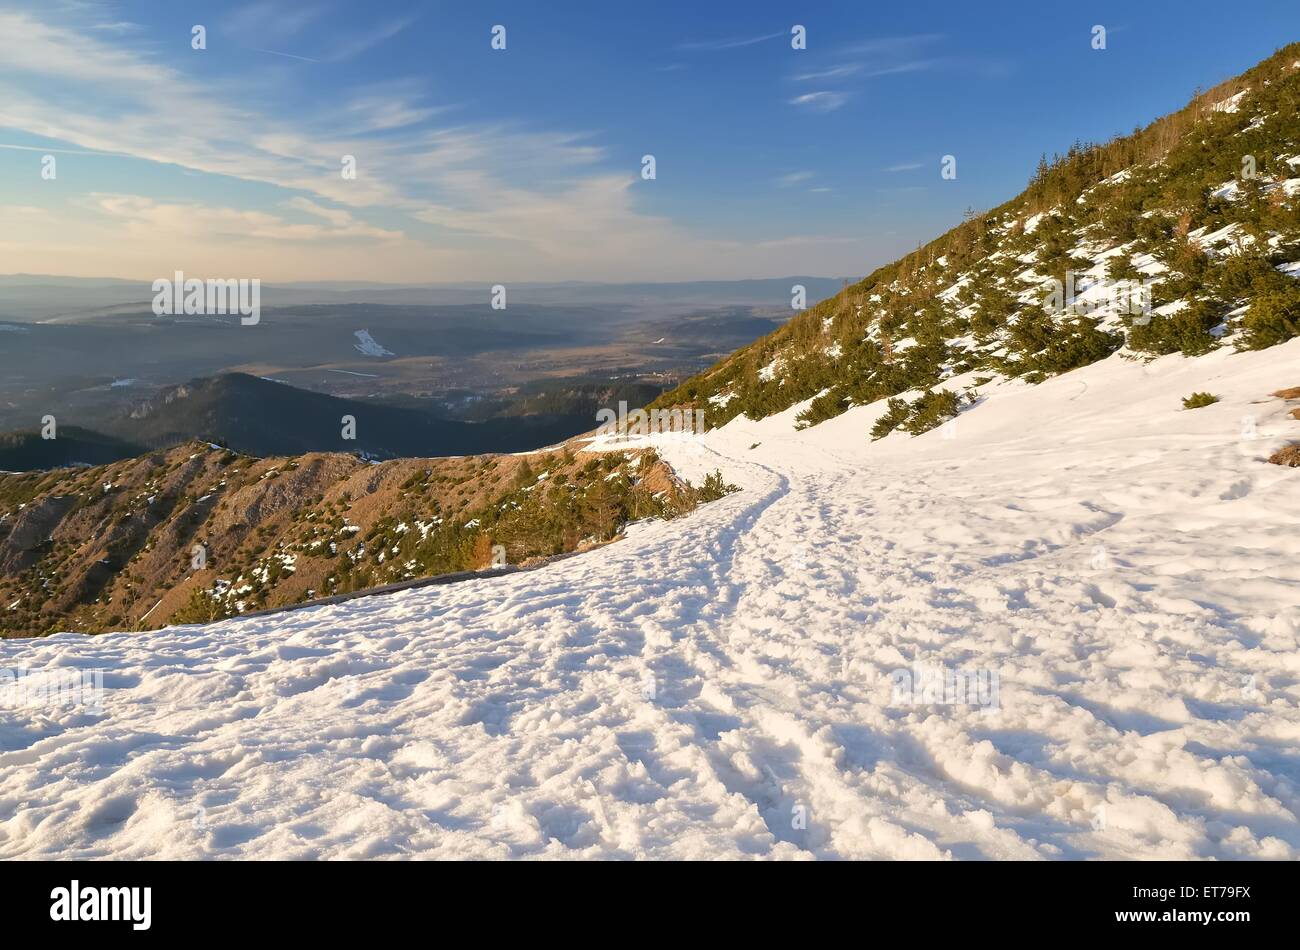 Winter mountain landscape. Snowy trail leading to the valley with view of highland, National Park in the Tatra Mountains, Poland Stock Photo